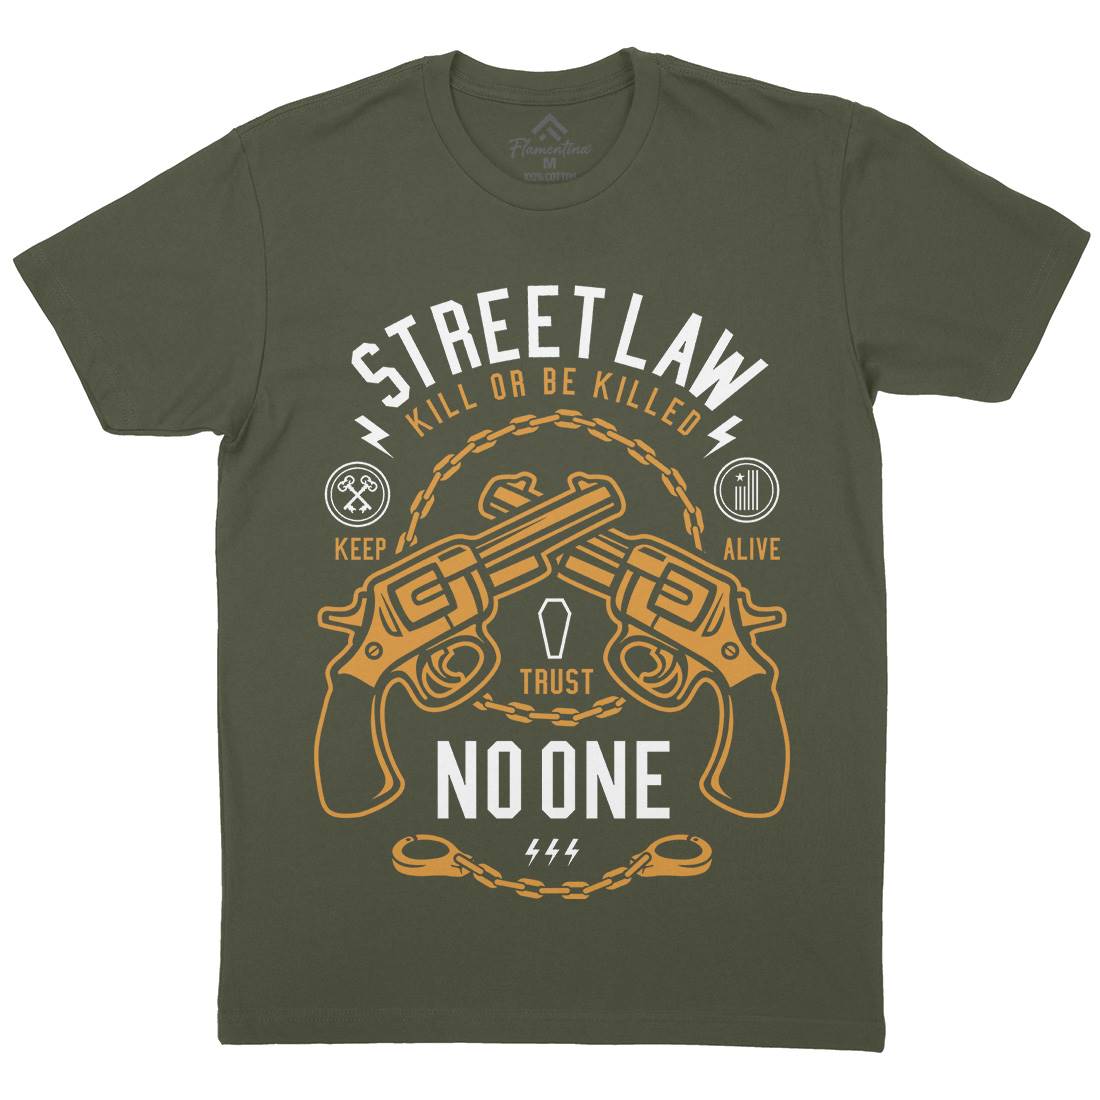 Street Law Mens Organic Crew Neck T-Shirt Quotes A286